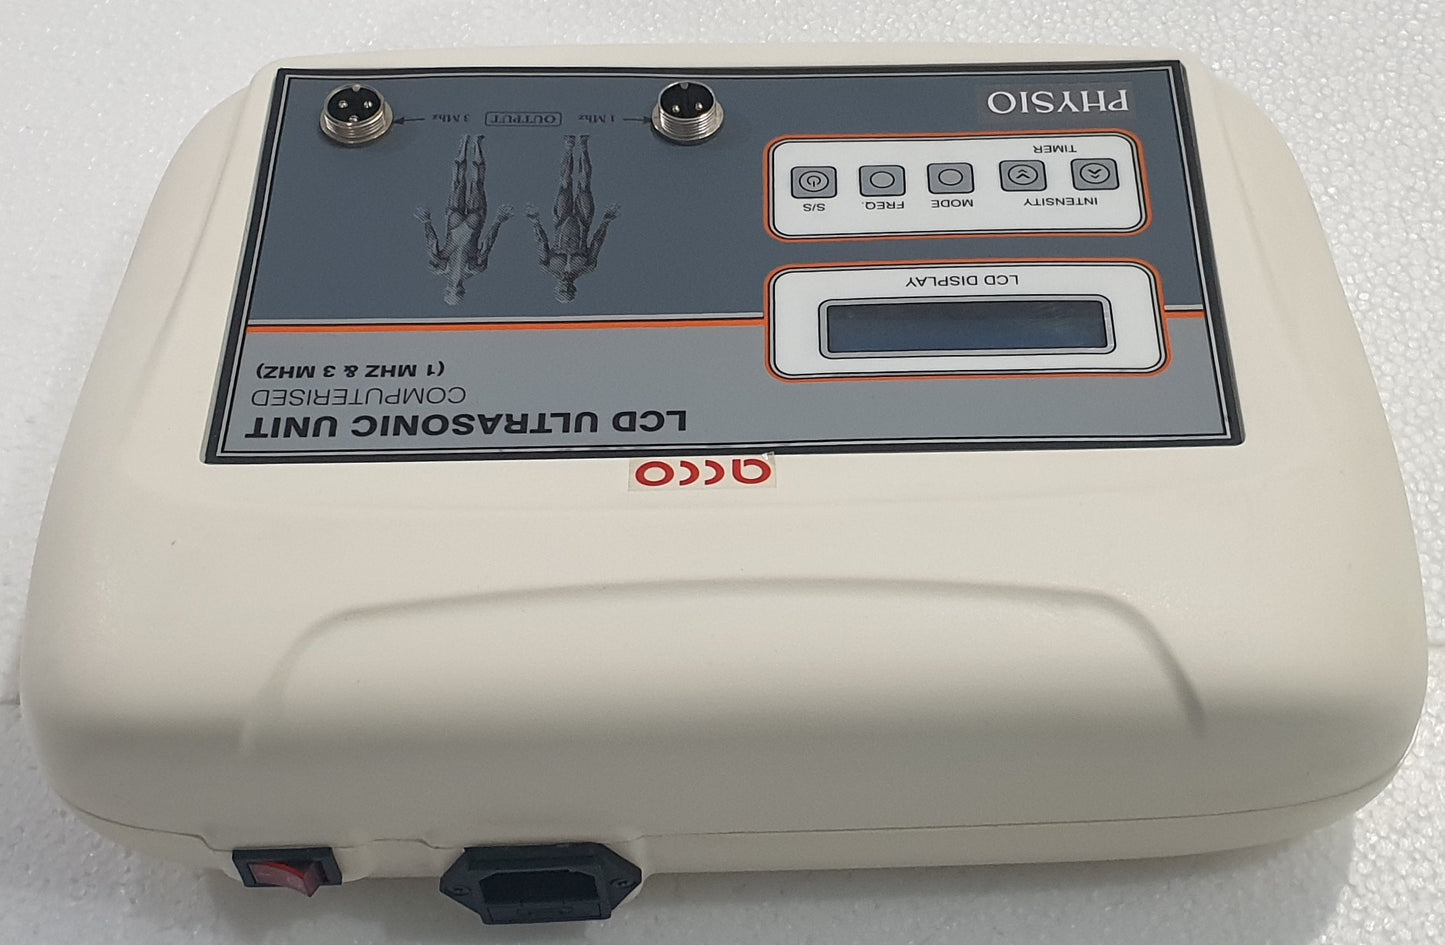 acco Ultrasound Therapy Machine 1& 3 Mhz, LCD Display - US24